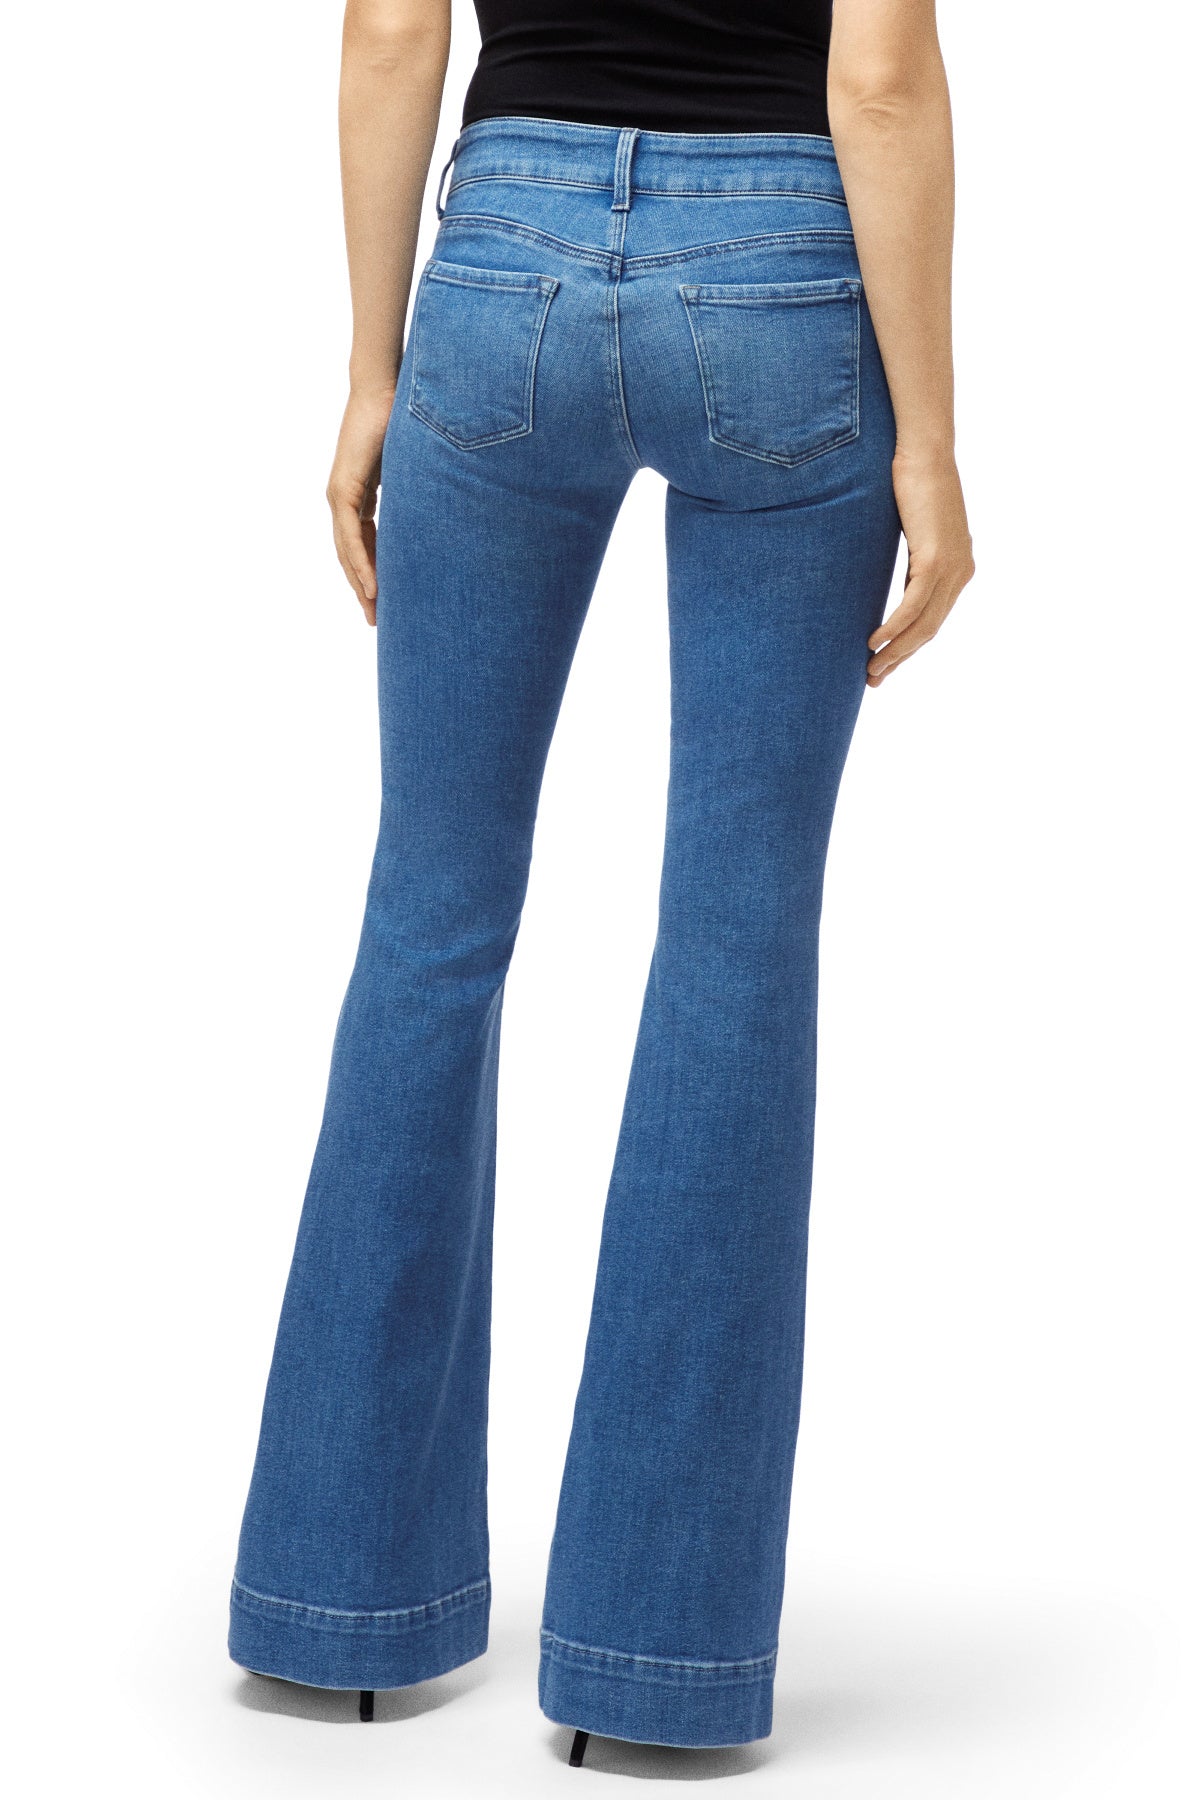 a brand flare jeans